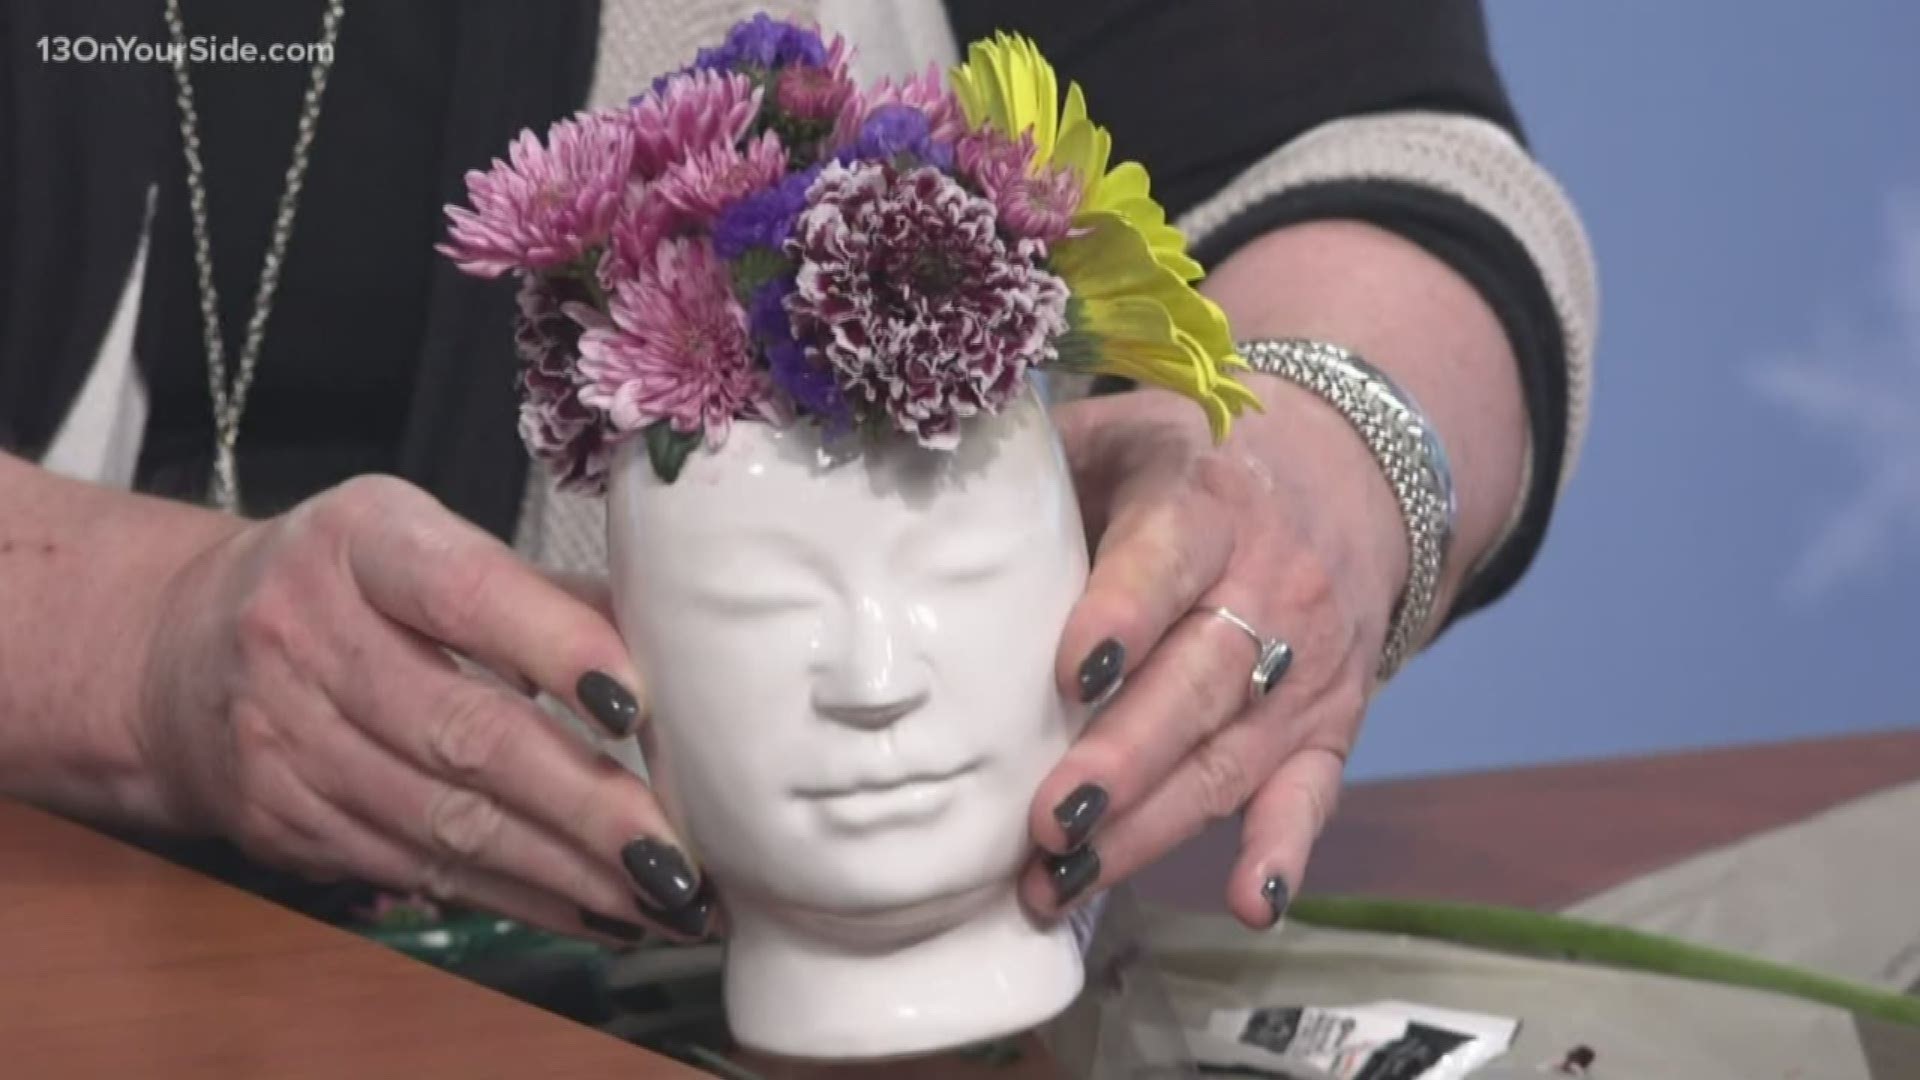 Flower expert J Schwanke shares tips on how to use flowers to brighten your mood.